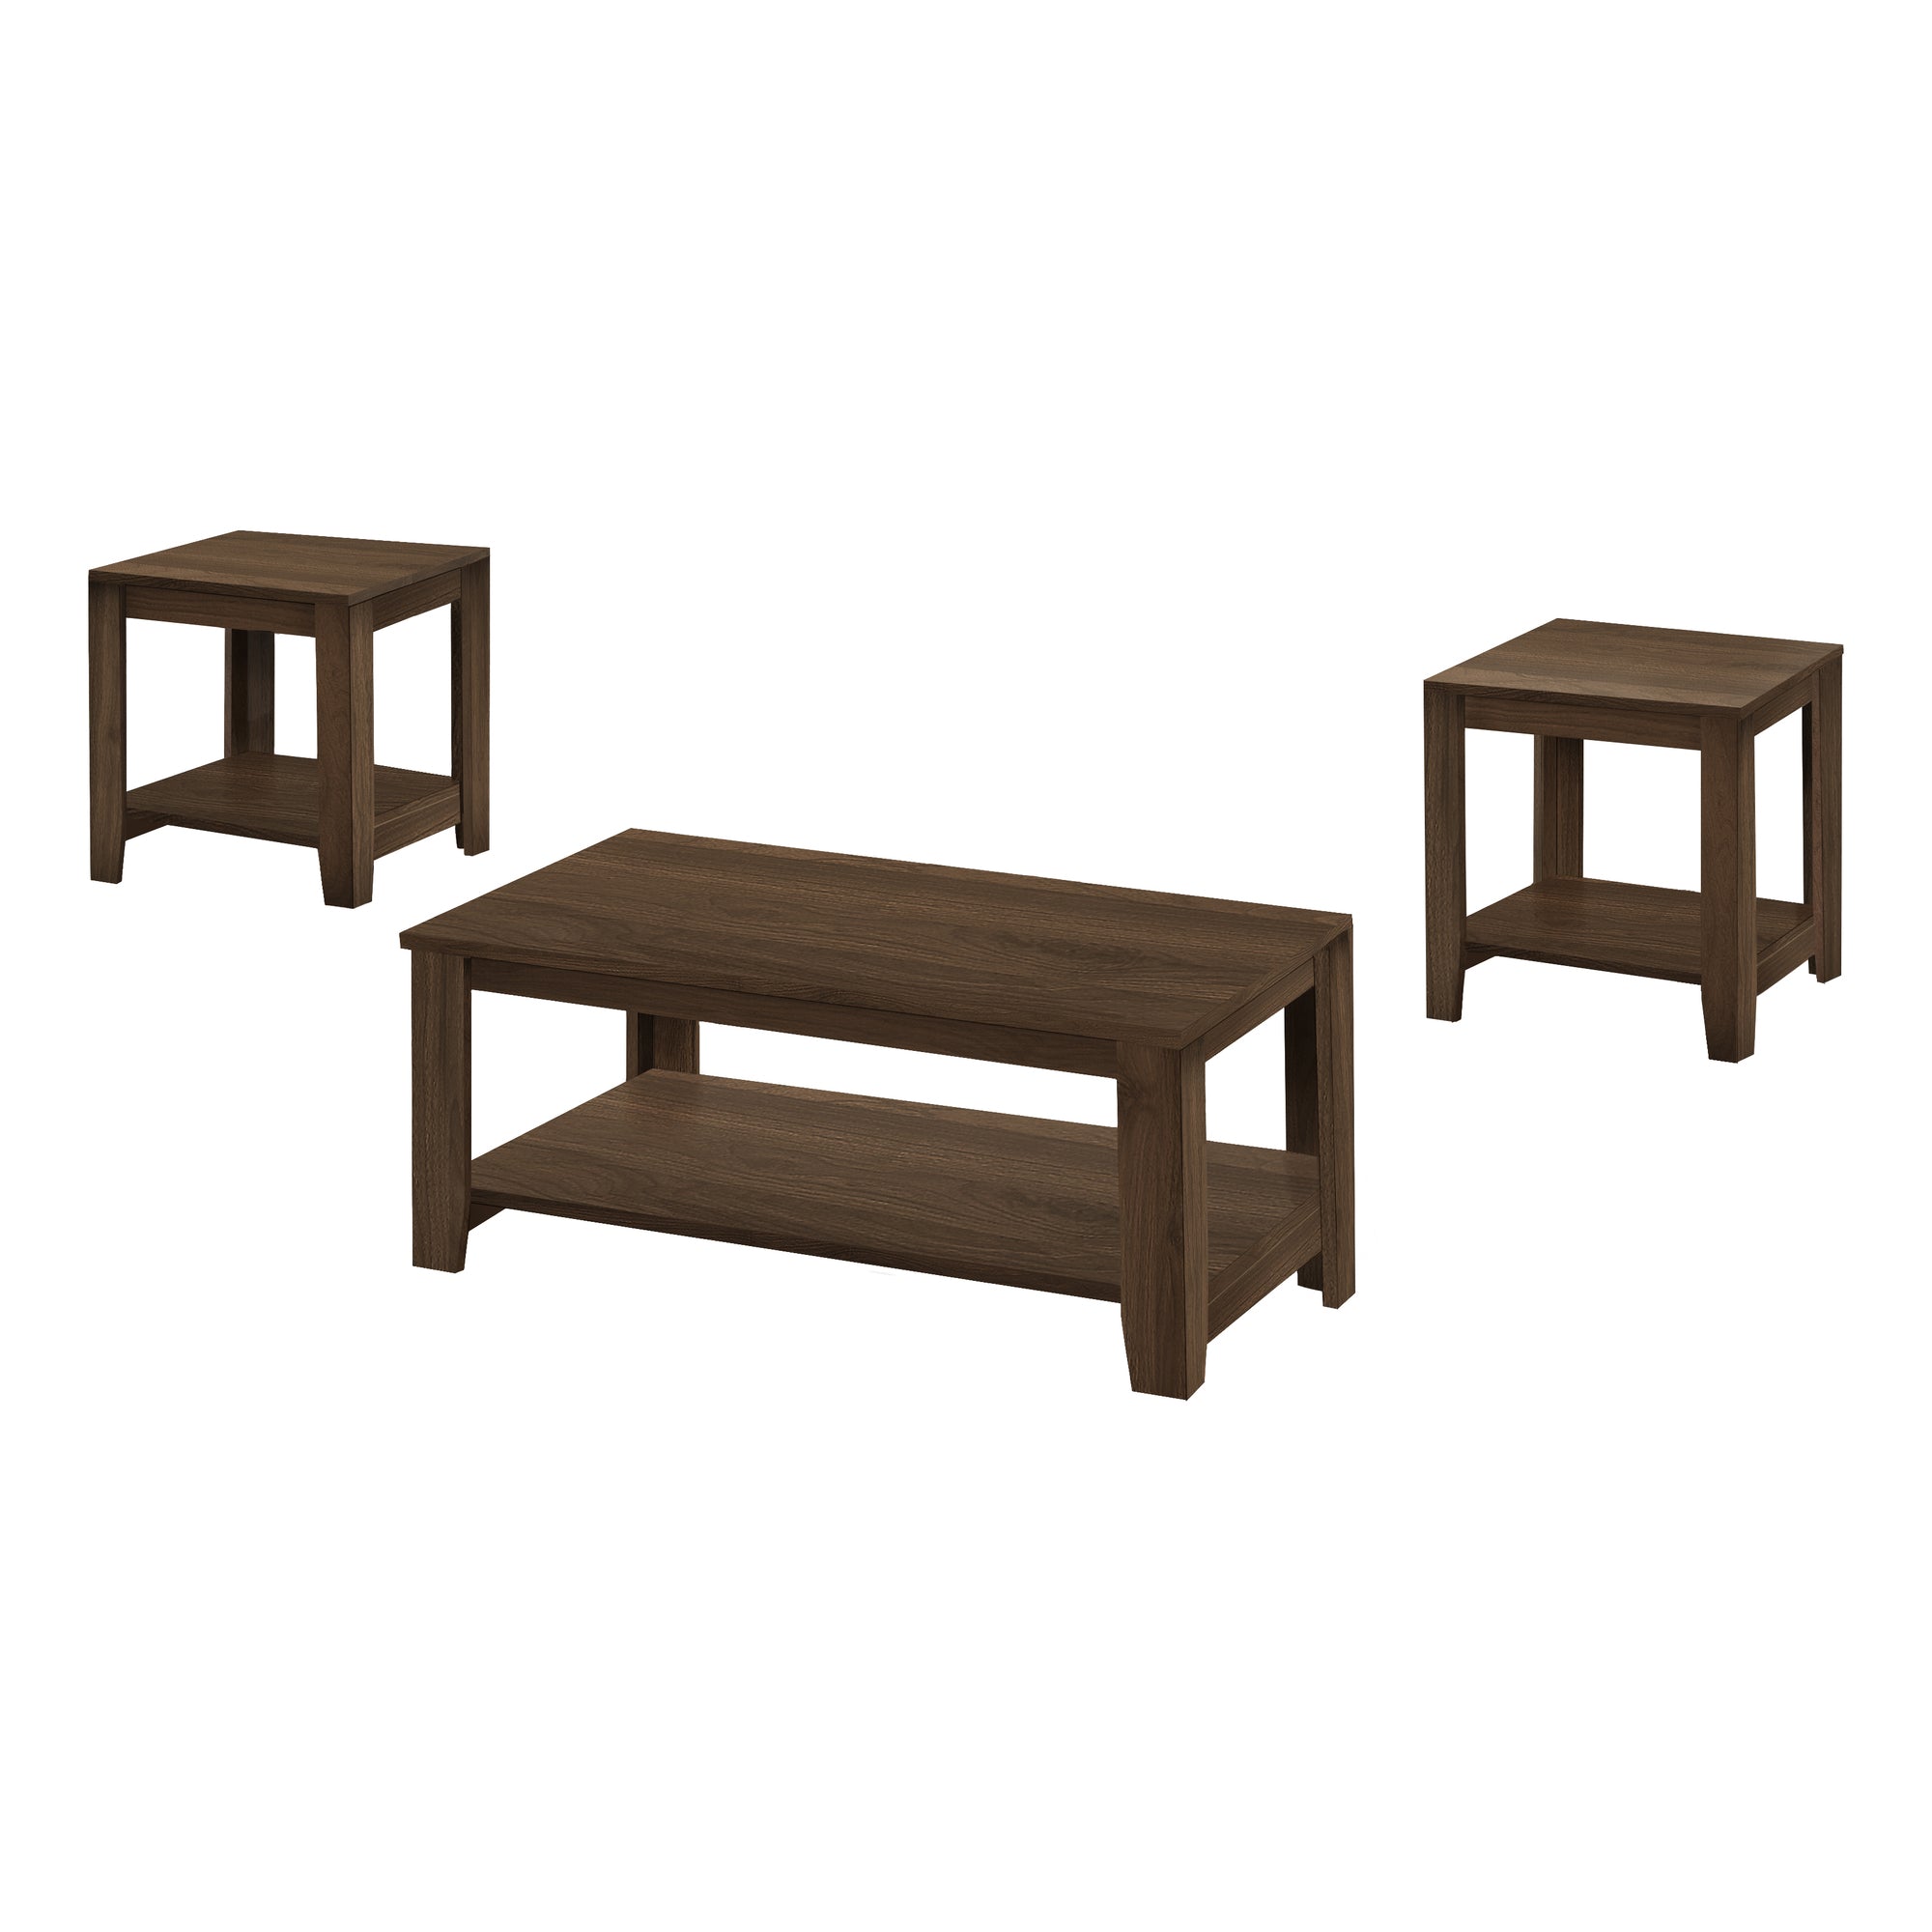 MN-597882P    Table Set, 3Pcs Set, Coffee, End, Side, Accent, Living Room, Laminate, Walnut, Contemporary, Modern